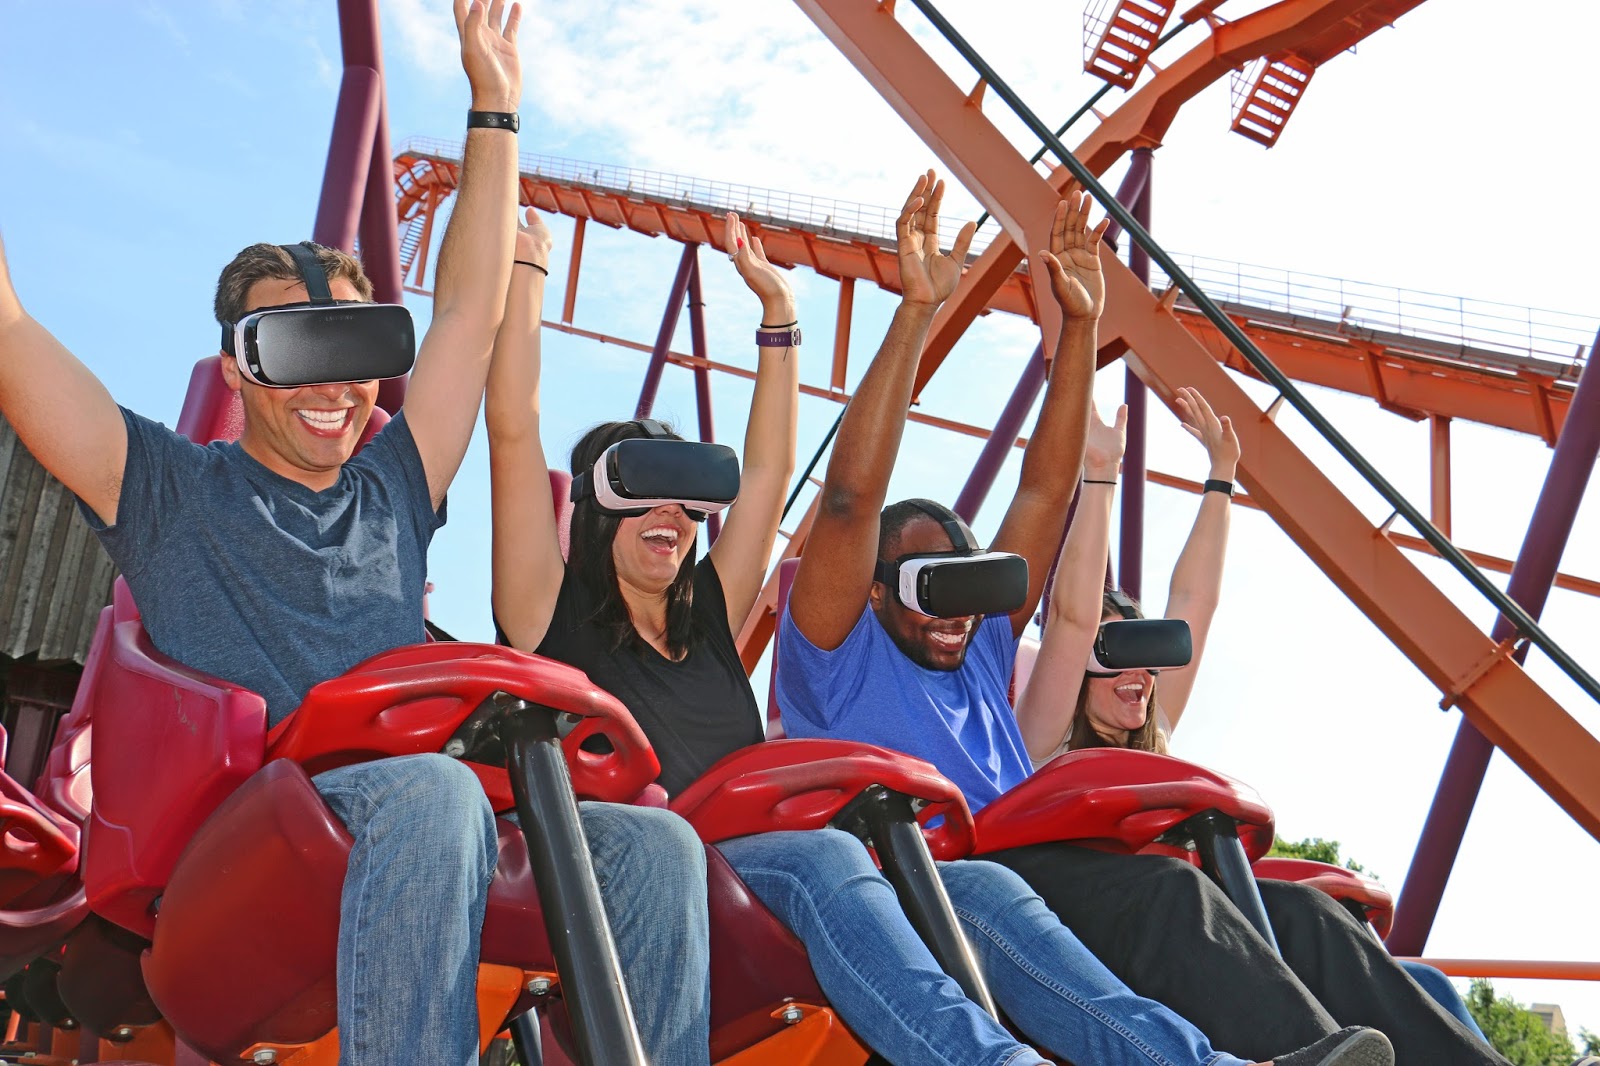 Six Flags Great America Announces New Virtual Reality Coaster